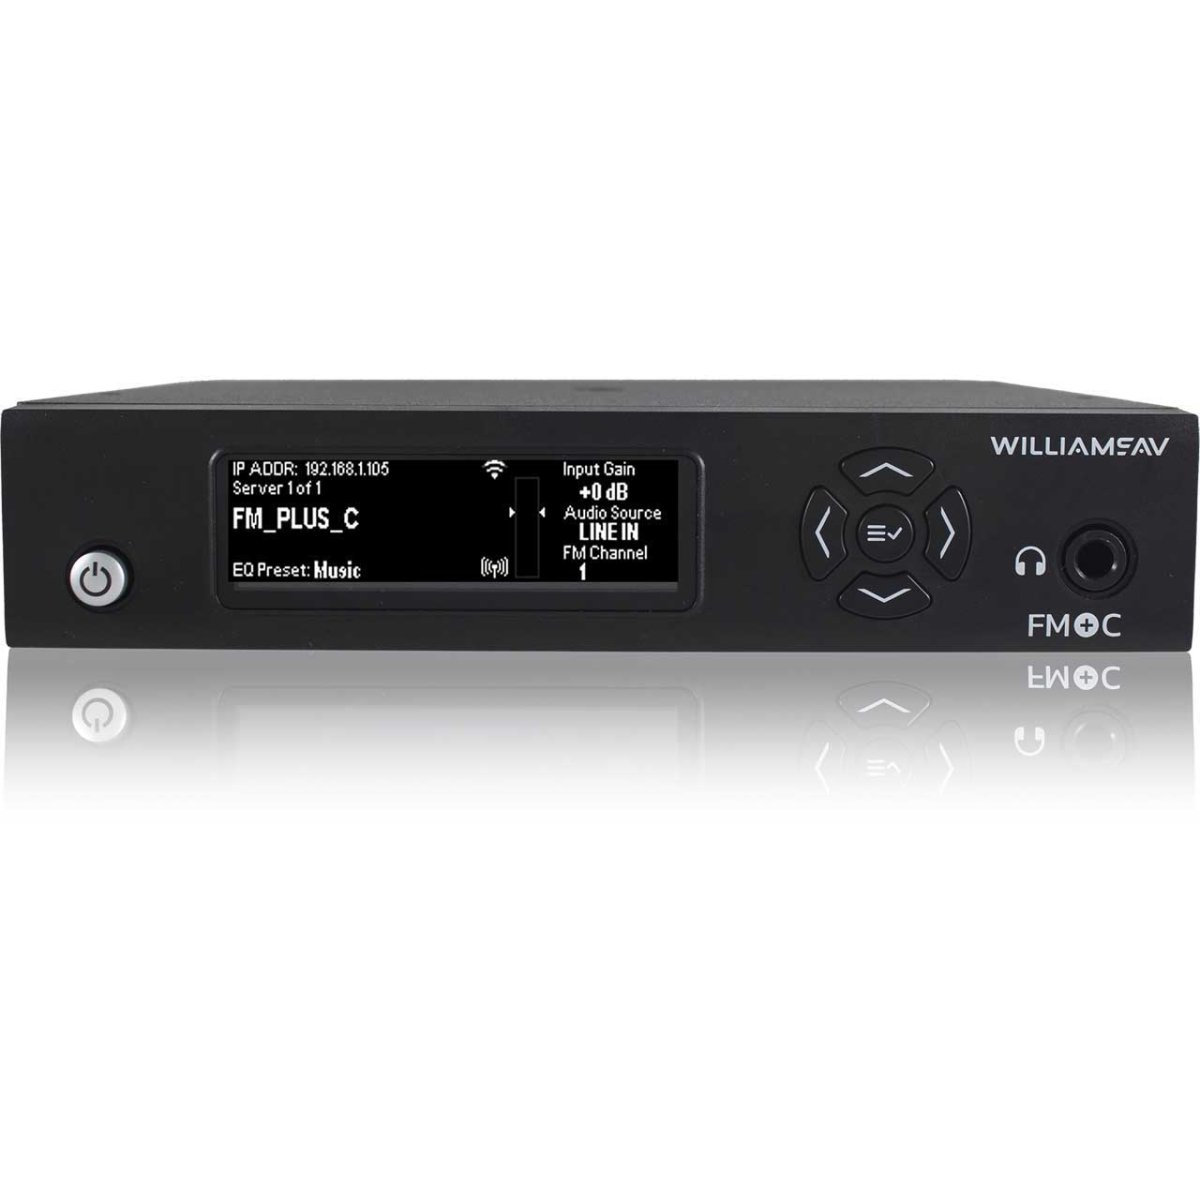 Picture of Williams AV WLS-FM-T55CD-00 Large-Area Dual FM & Wi-Fi Base Transmitter with Network Control